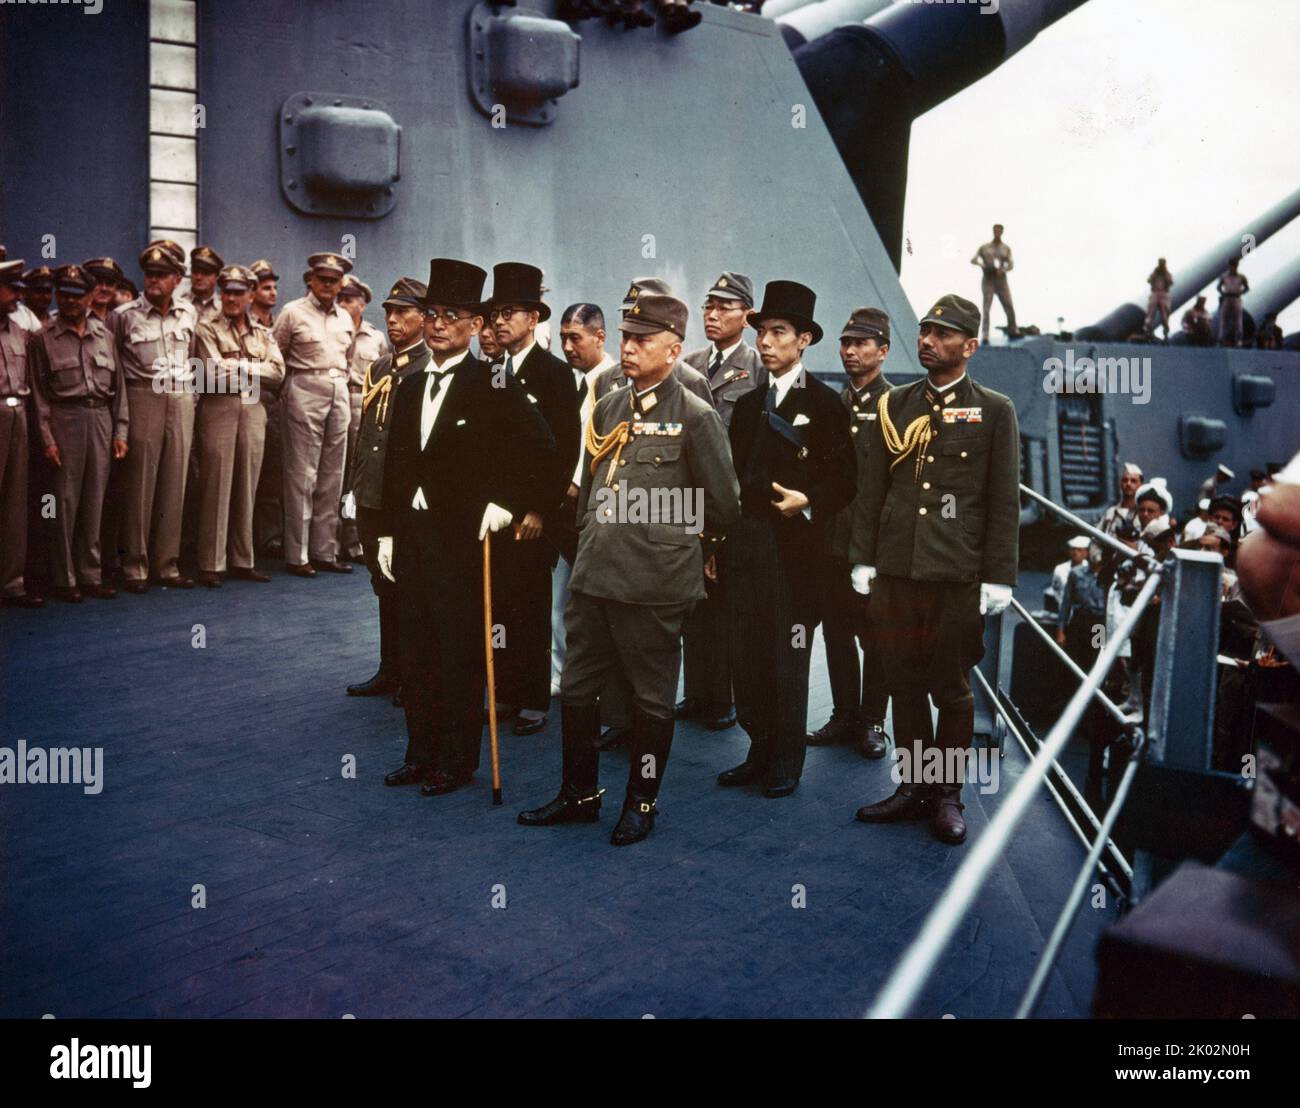 Surrender of Japan, Tokyo Bay, 2 September 1945: Representatives of the Empire of Japan on board USS Missouri, during the surrender ceremonies. Standing in front are: Foreign Minister Mamoru Shigemitsu and General Yoshijiro Umezu, Chief of the Army General Staff.&#13;&#10;Behind them are middle row, left to right: Major General Yatsuji Nagai, Army; Katsuo Okazaki, Foreign Ministry; Rear Admiral Tadatoshi Tomioka, Navy; Toshikazu Kase, Foreign Ministry, and Lieutenant General Suichi Miyakazi, Army. Stock Photo